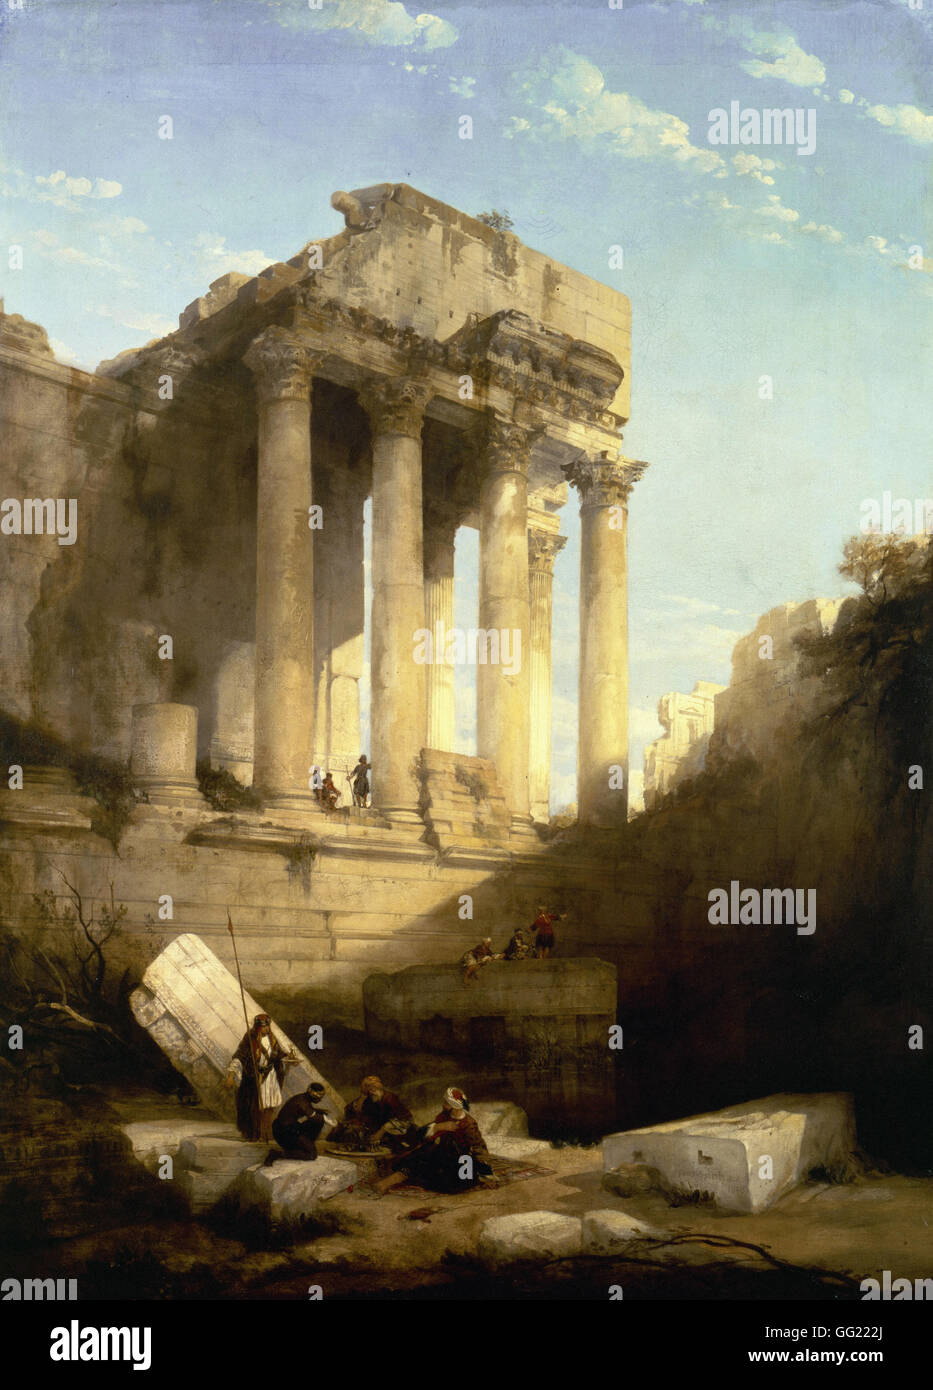 David Roberts - Baalbec - Ruins of the Temple of Bacchus Stock Photo